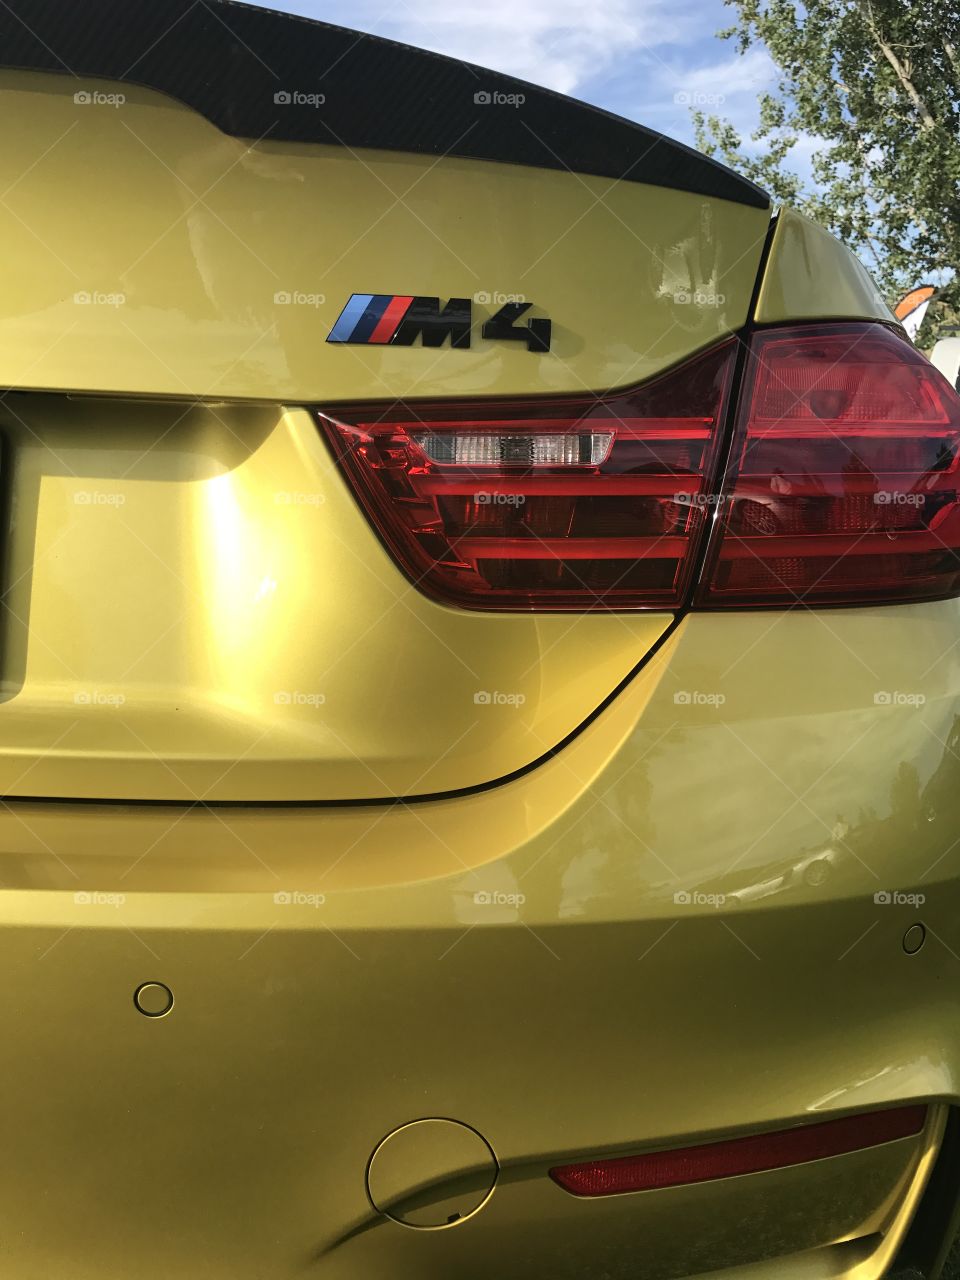 #goldenm4 #bmw #m4 #f83 #beast #bmwpower #TWinturbo #germanpower #perfection #Mseries #competition